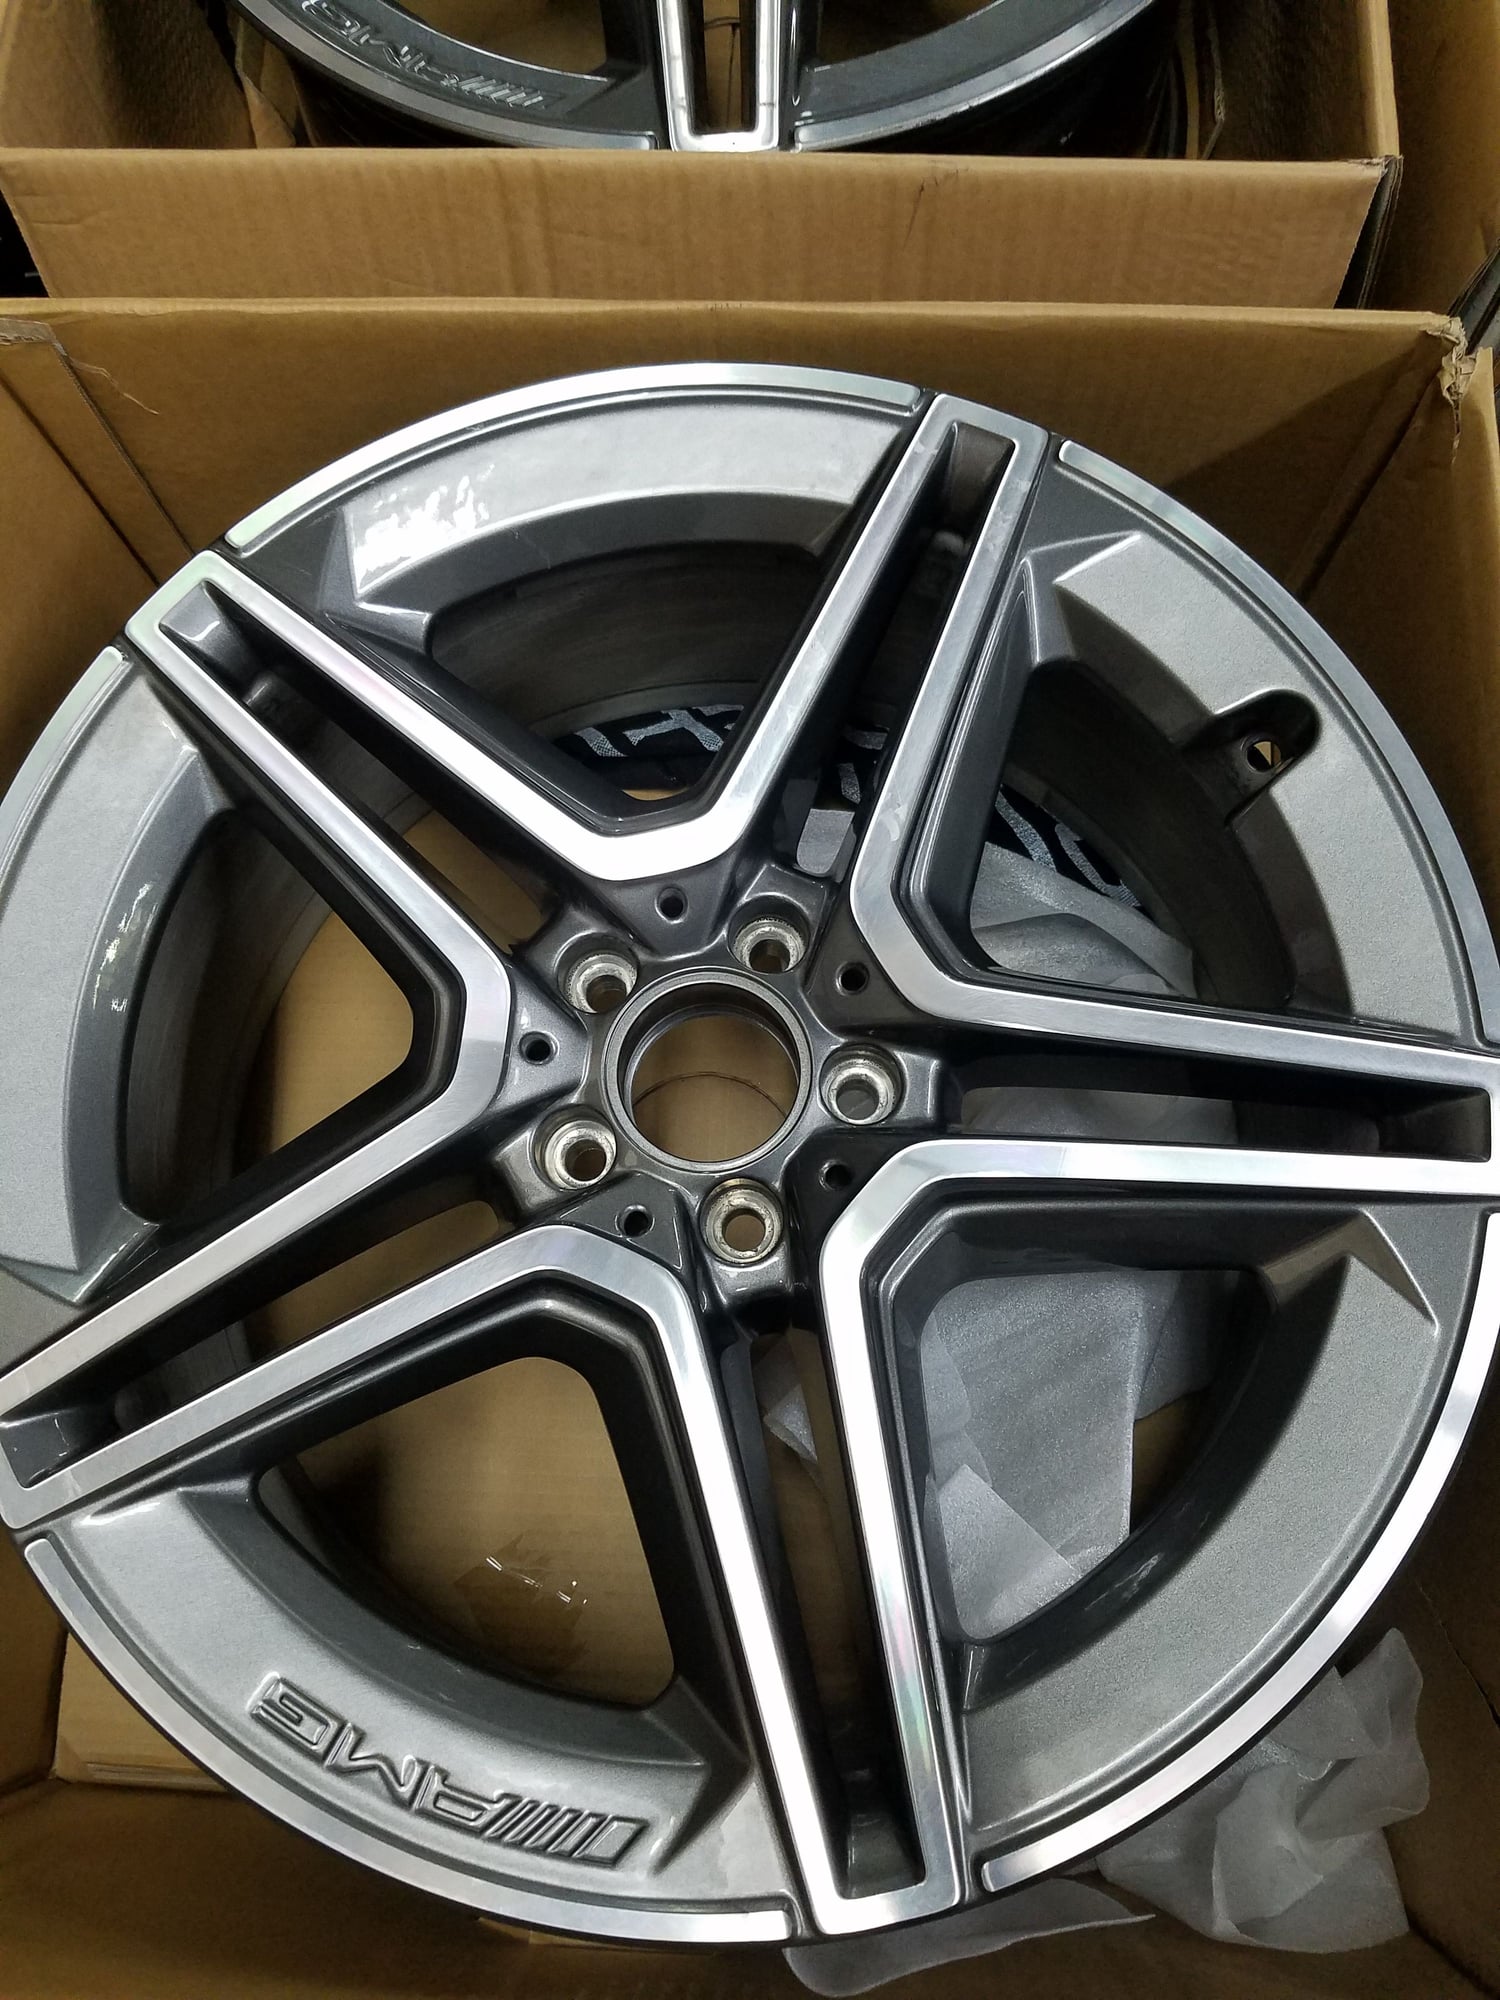 Wheels and Tires/Axles - W167 2020 GLE AMG WHEELS SET OF 4 - Used - 0  All Models - Dallas, TX 75021, United States